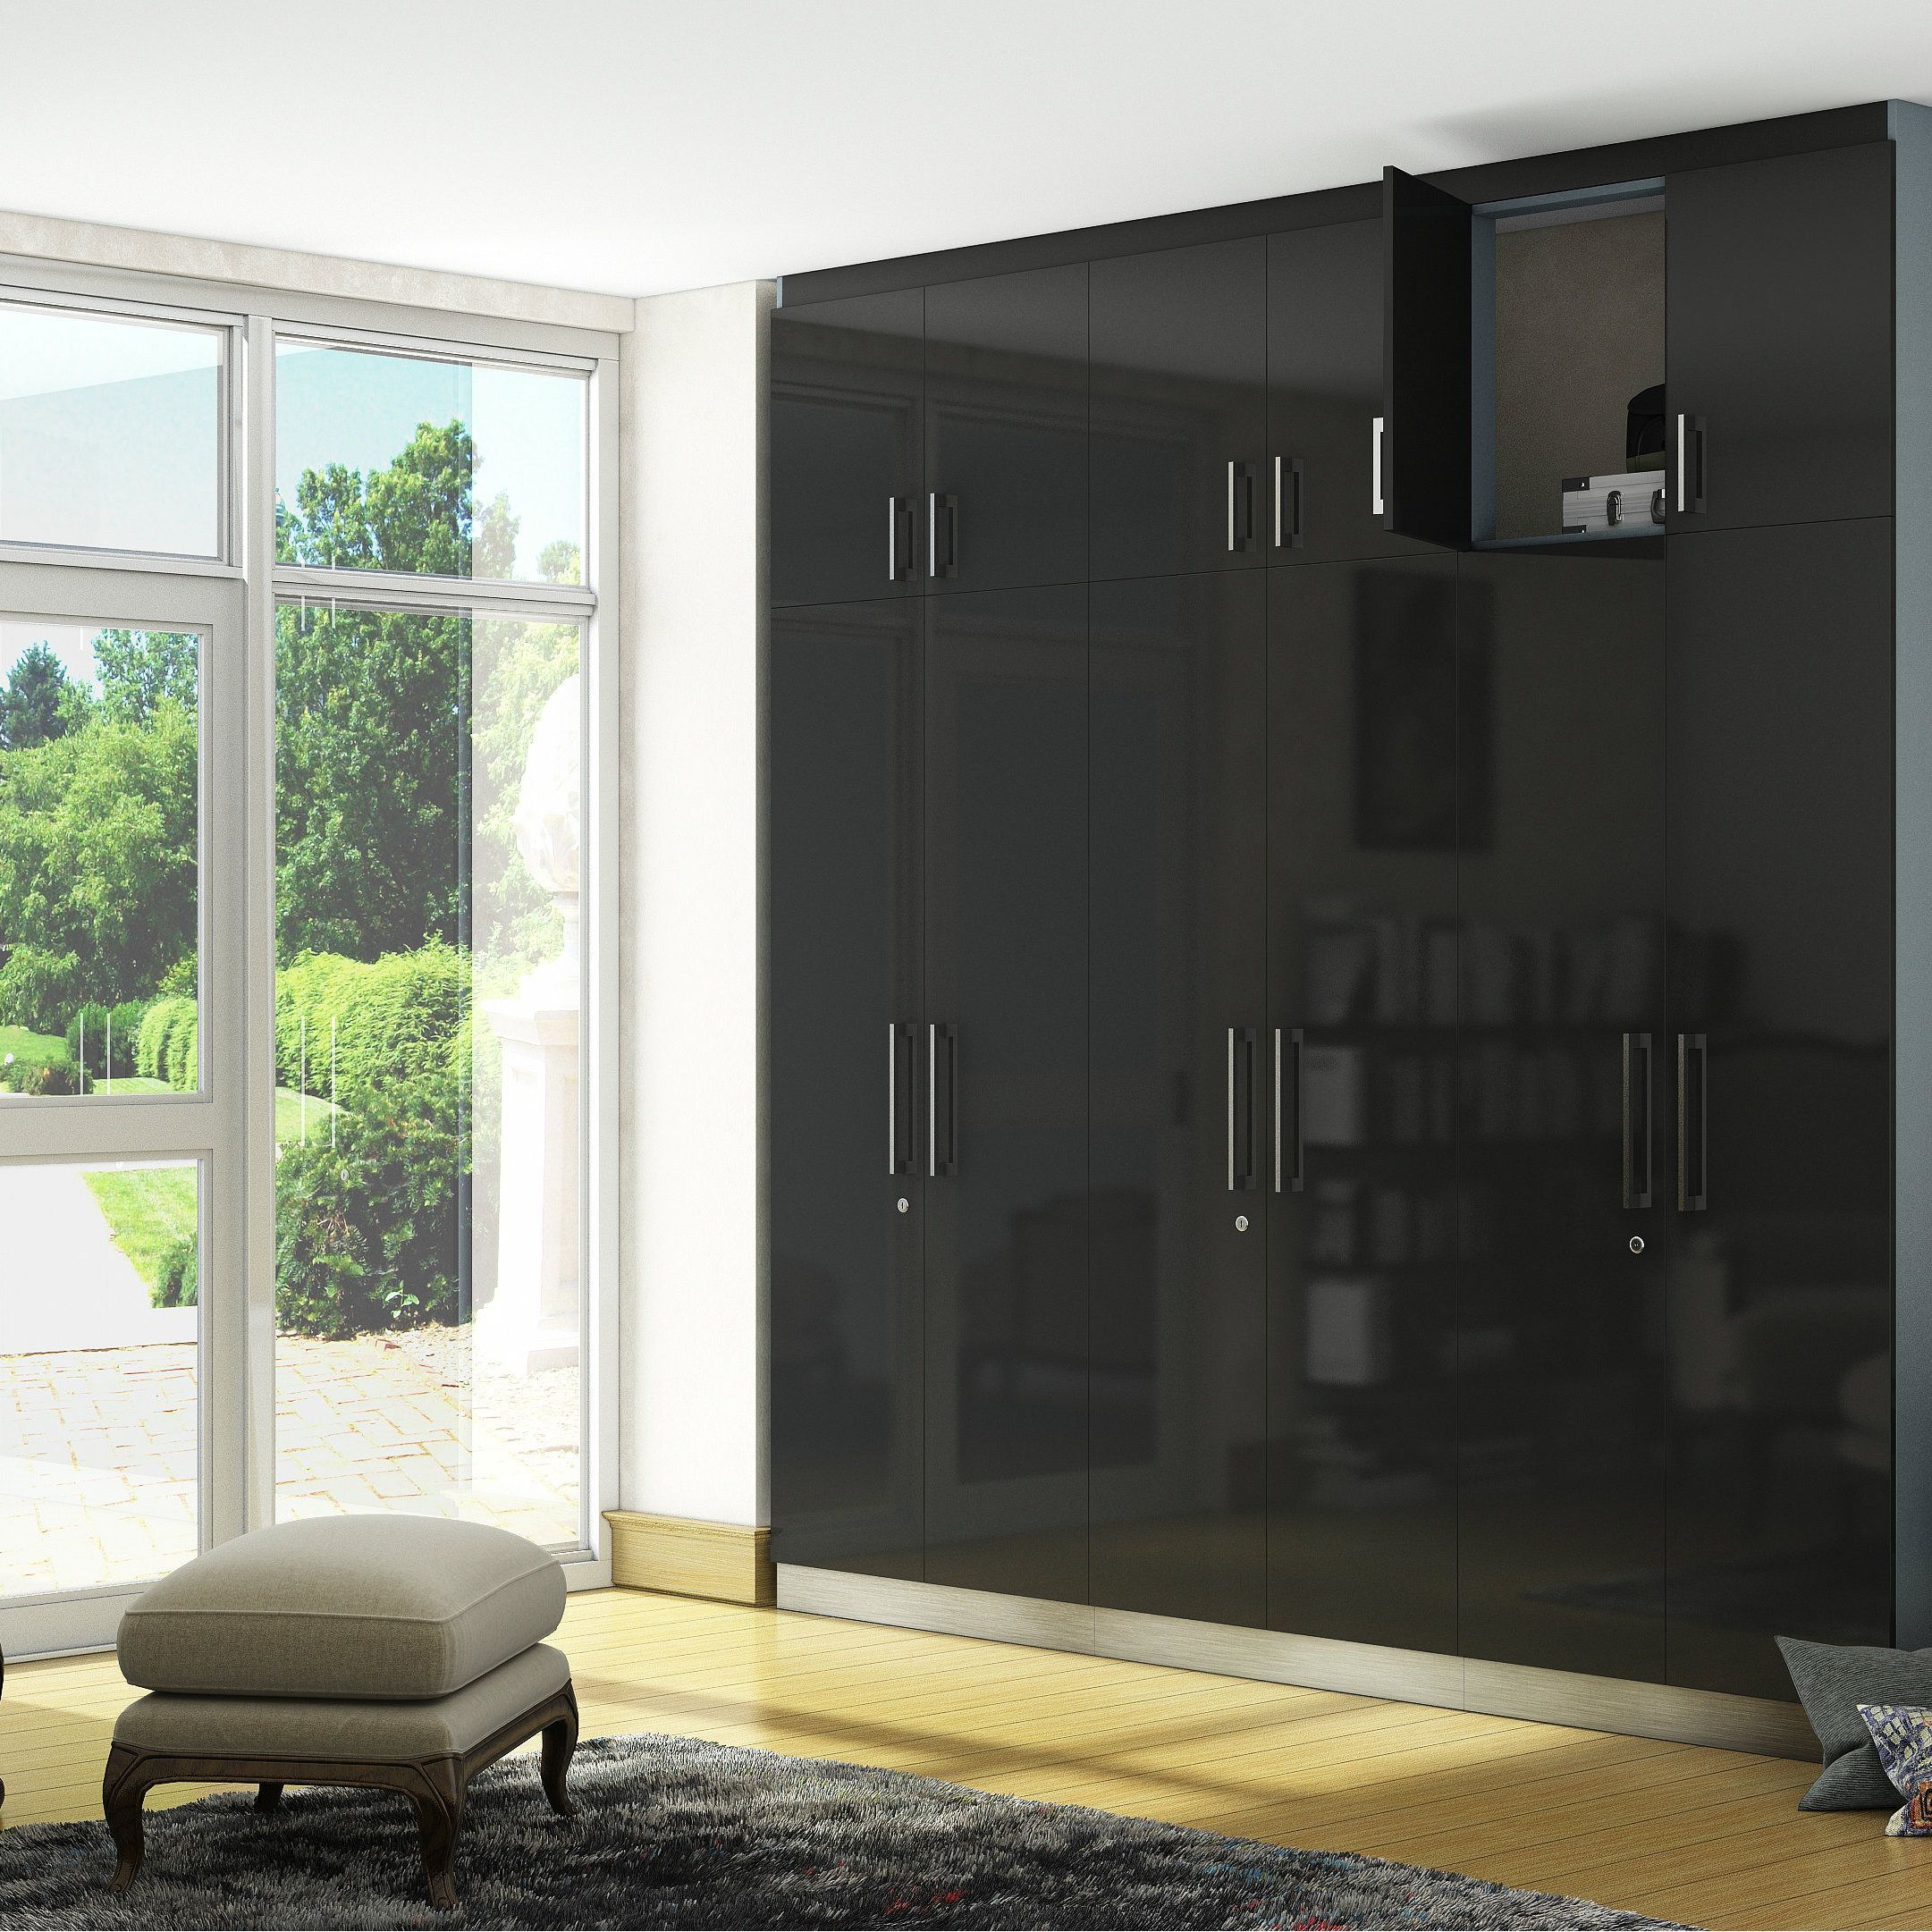 A Glossy Black Wardrobe That Is Every Bit As Impressive And Functional |  Wardrobe Design, Furniture Design, Grey Wardrobe Within Black Gloss Wardrobes (Gallery 7 of 20)